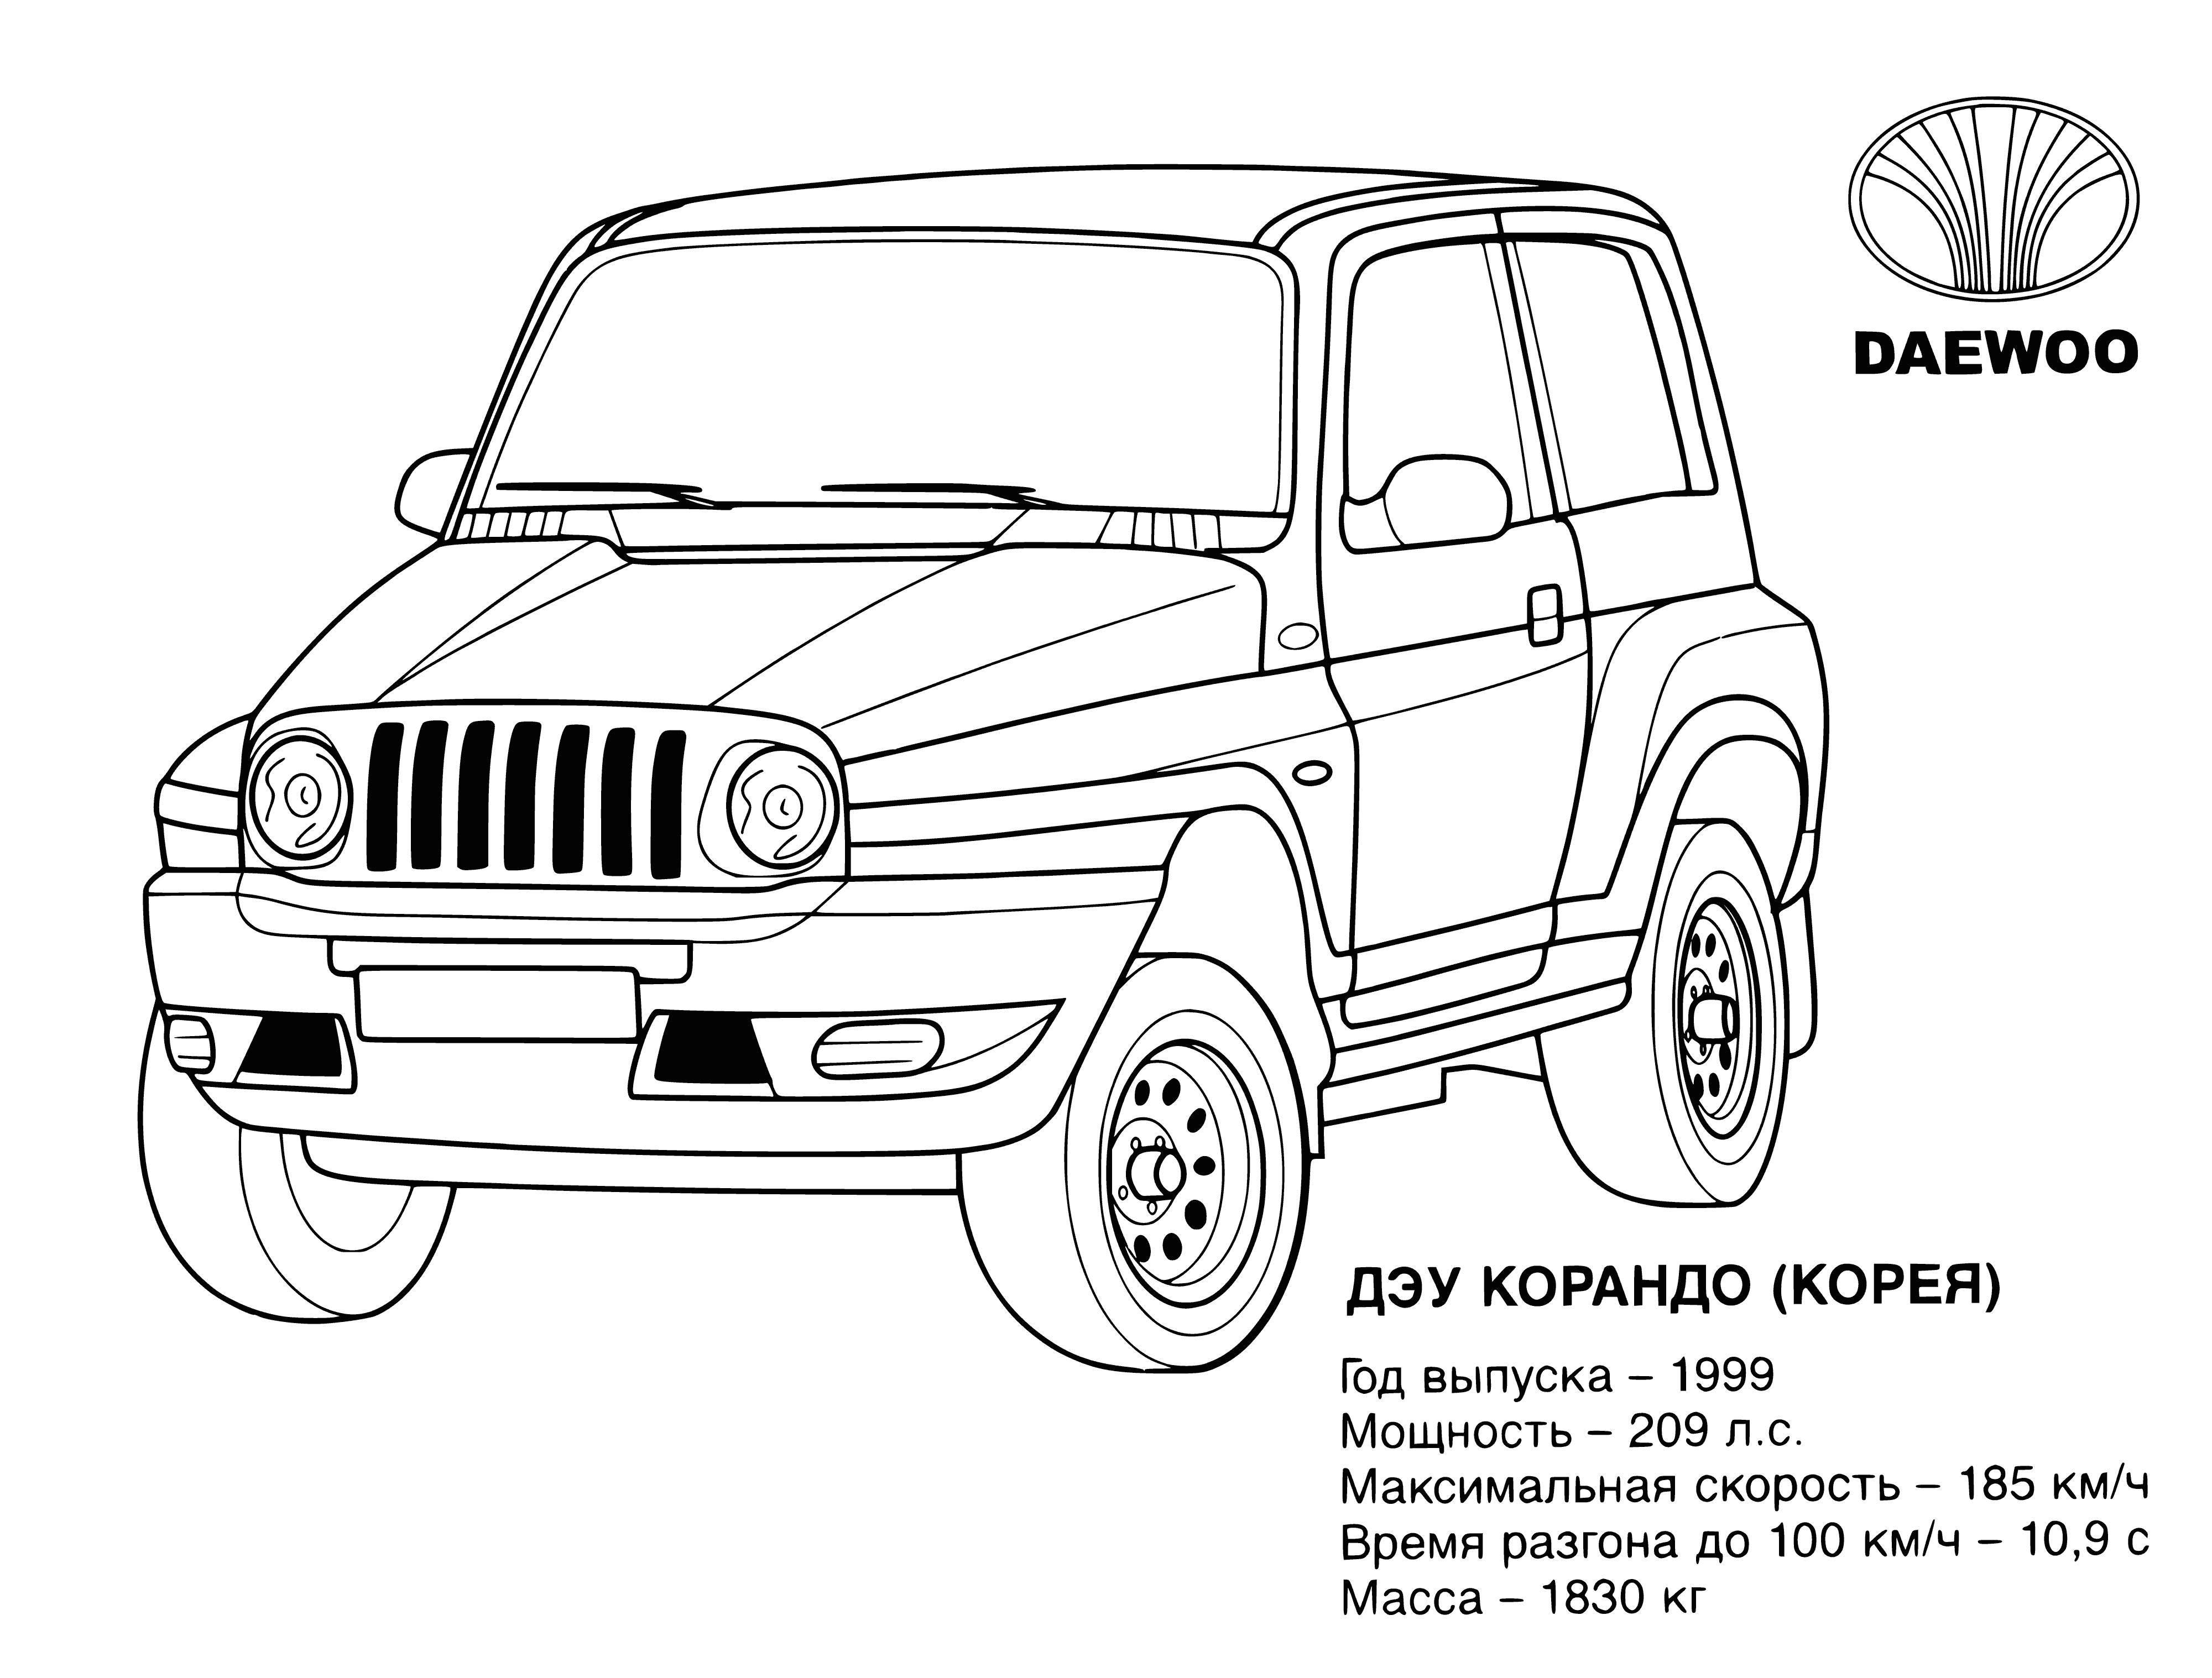 coloring page: Four jeeps of different colors parked in a row, doors open, people smiling - a happy coloring page scene! #coloring #jeeps